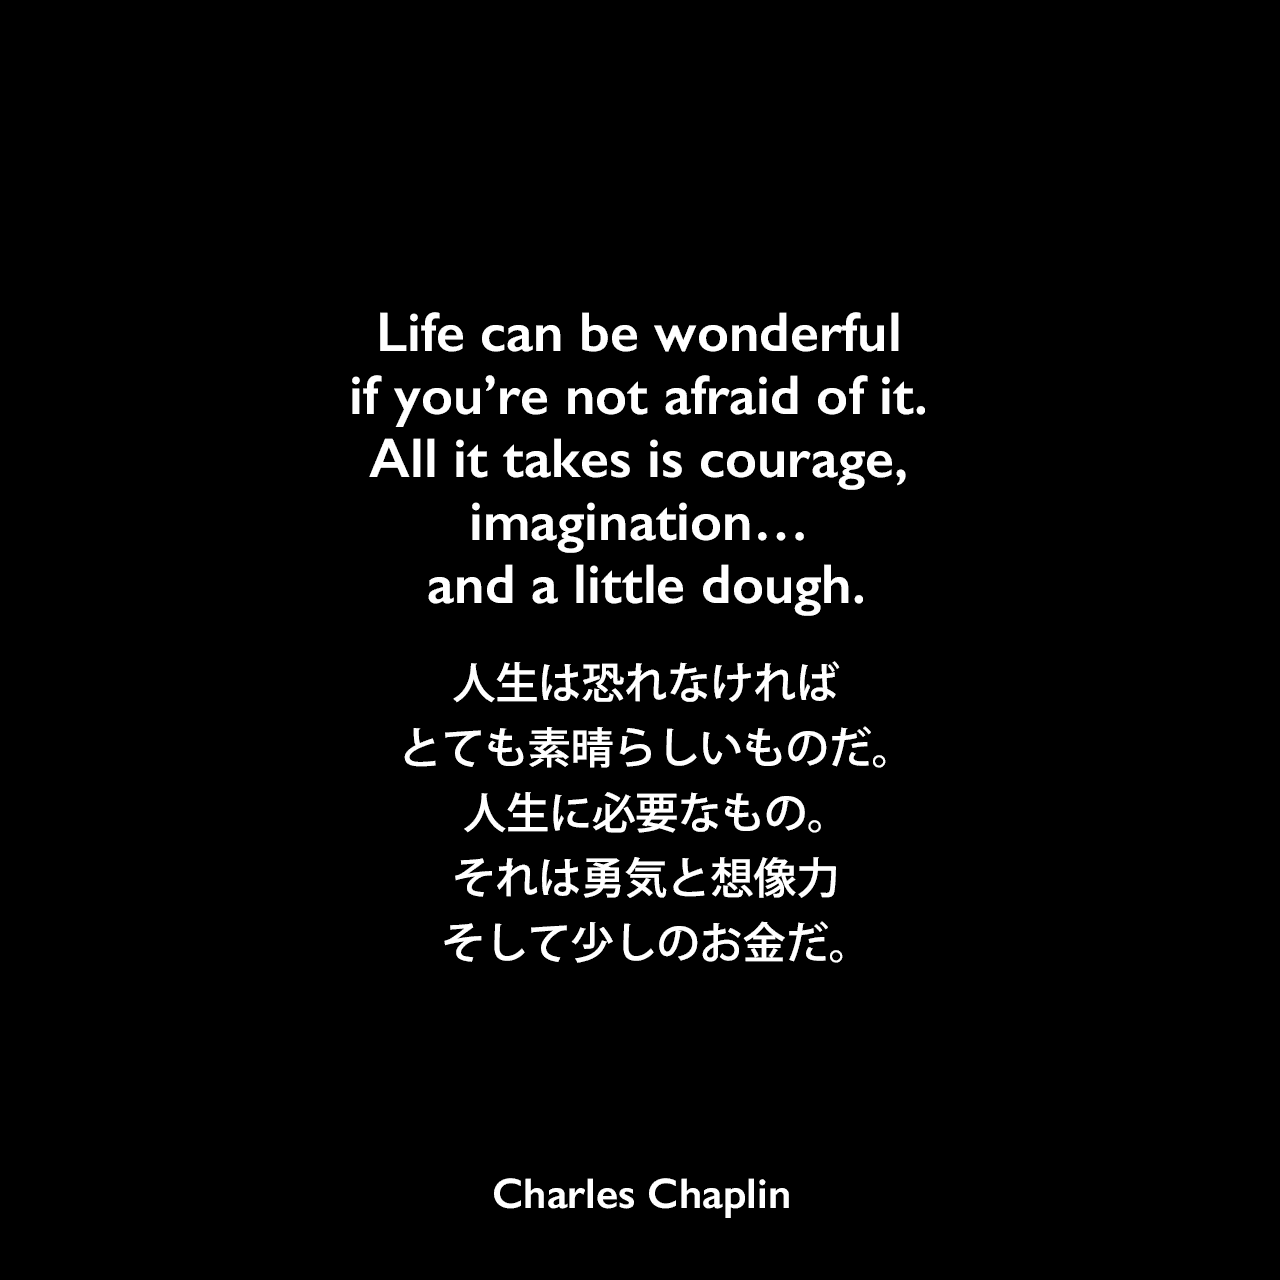 Life can be wonderful if you’re not afraid of it. All it takes is courage, imagination… and a little dough.人生は恐れなければ、とても素晴らしいものだ。人生に必要なもの。それは勇気と想像力、そして少しのお金だ。- 映画「ライムライト」のセリフよりCharles Chaplin